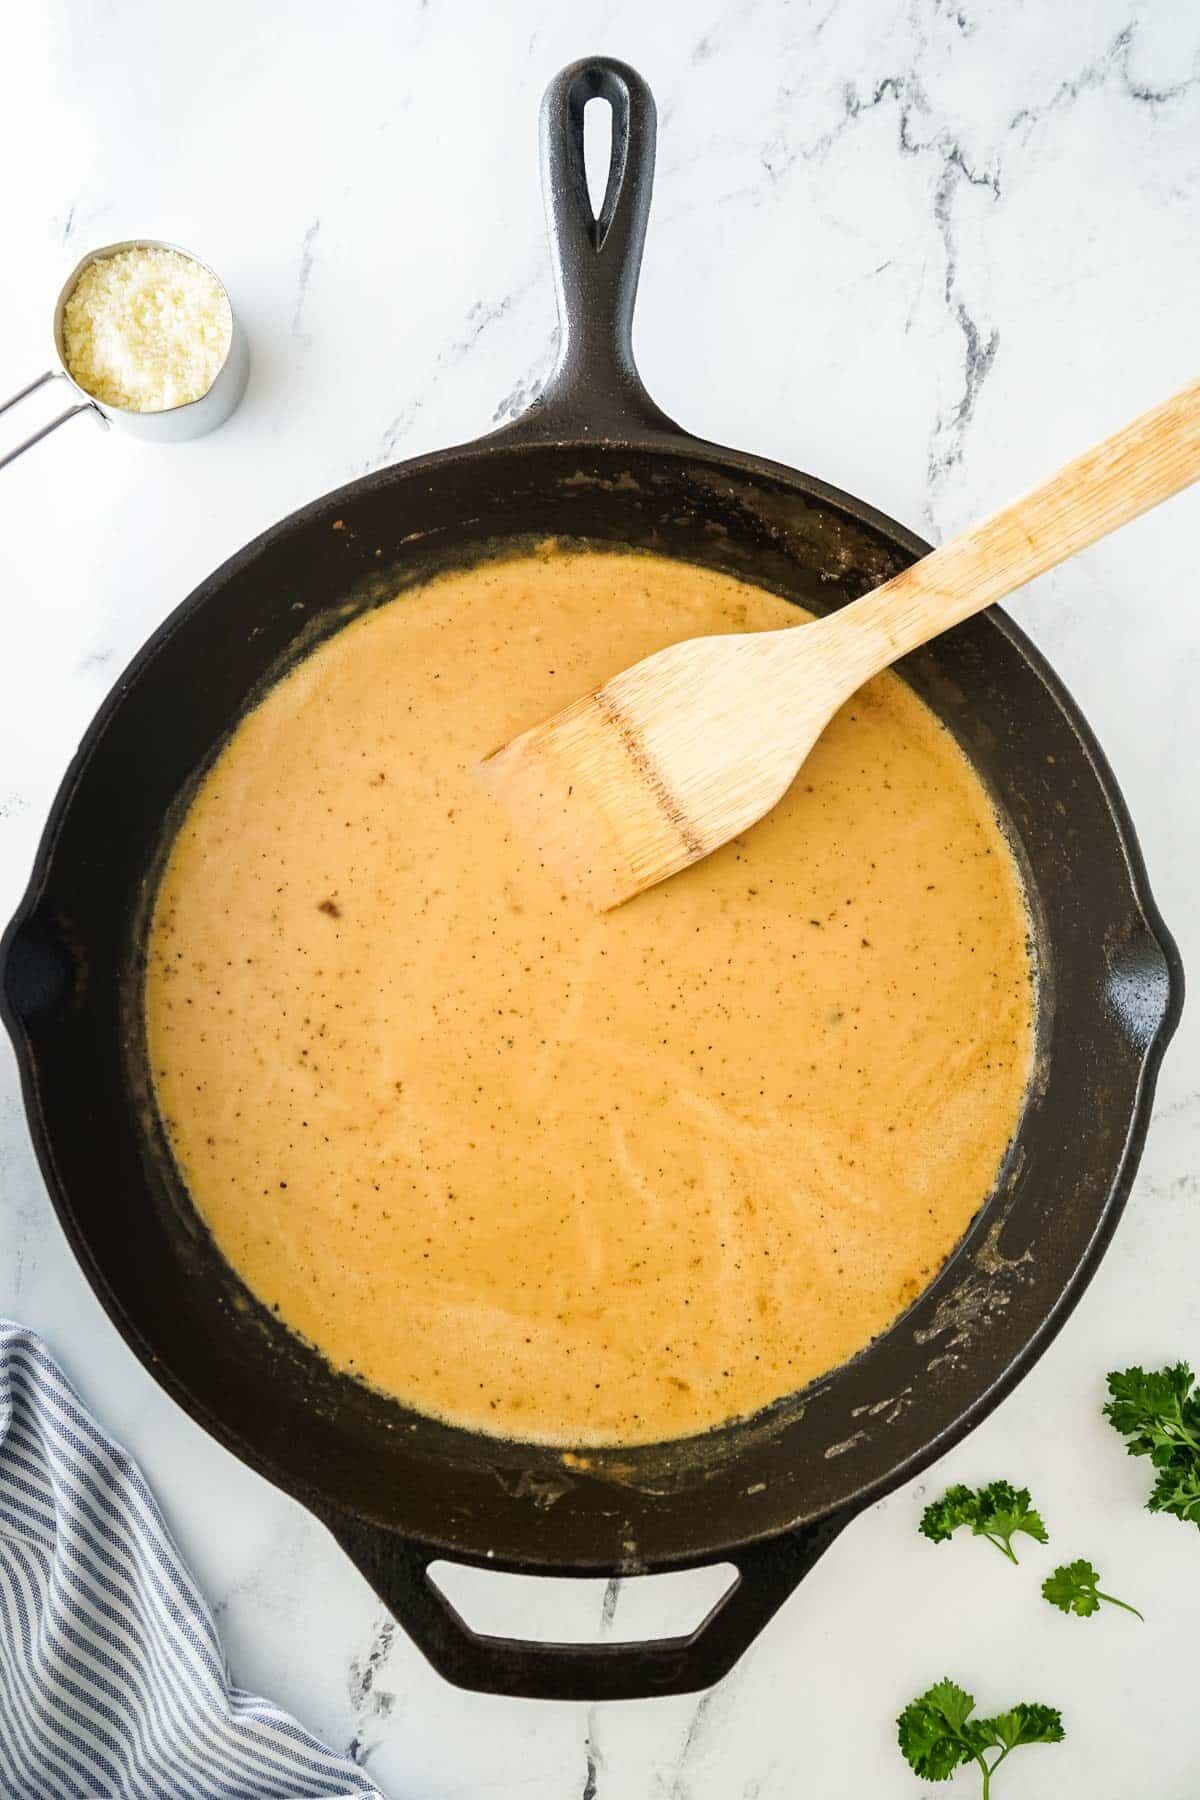 Sauce for the creamy chicken with mashed potatoes being cooked in a cast iron pan.